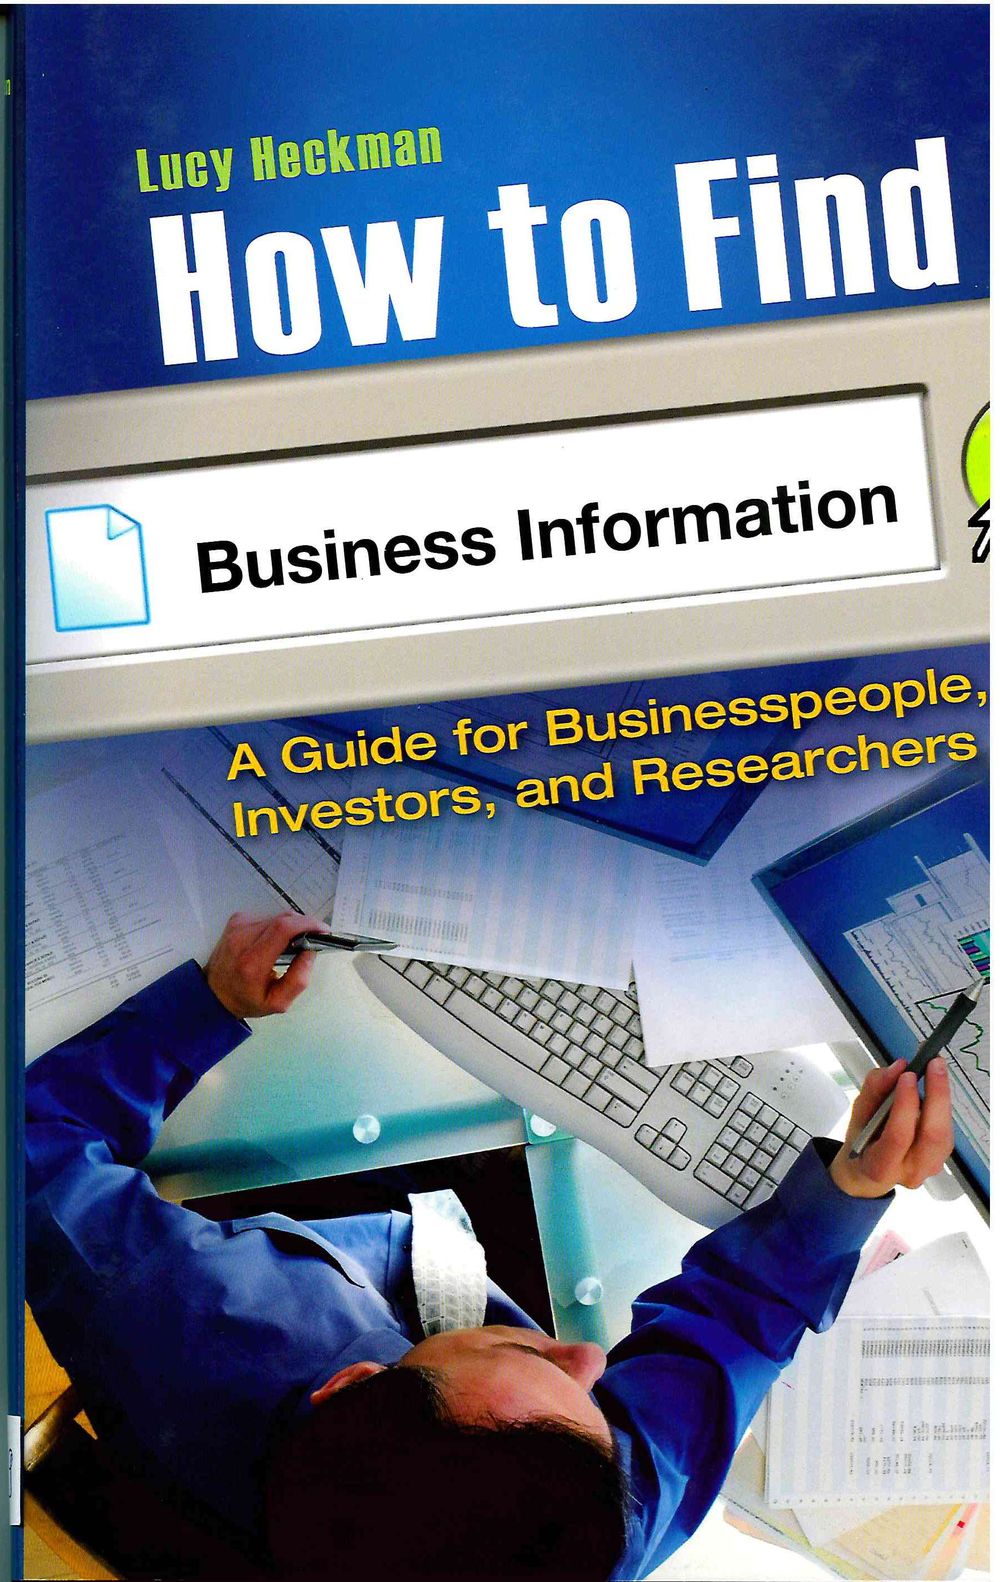 Lucy Heckman: How to find business information - cover image